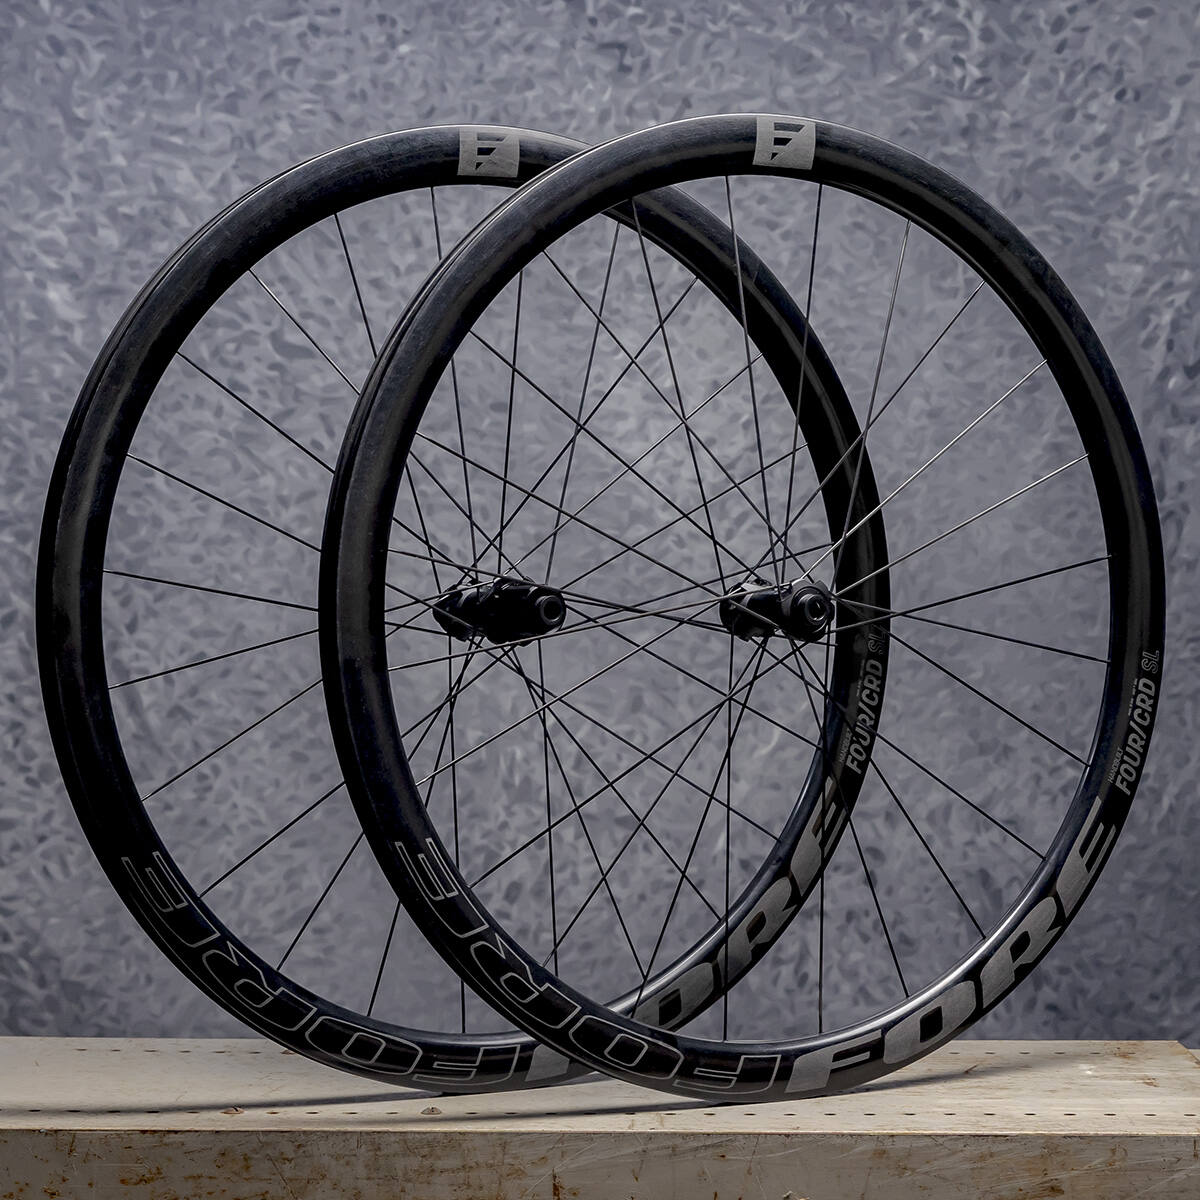 WIELSET CLINCHER FOUR SL CRD DT240 SHIMANO BODY